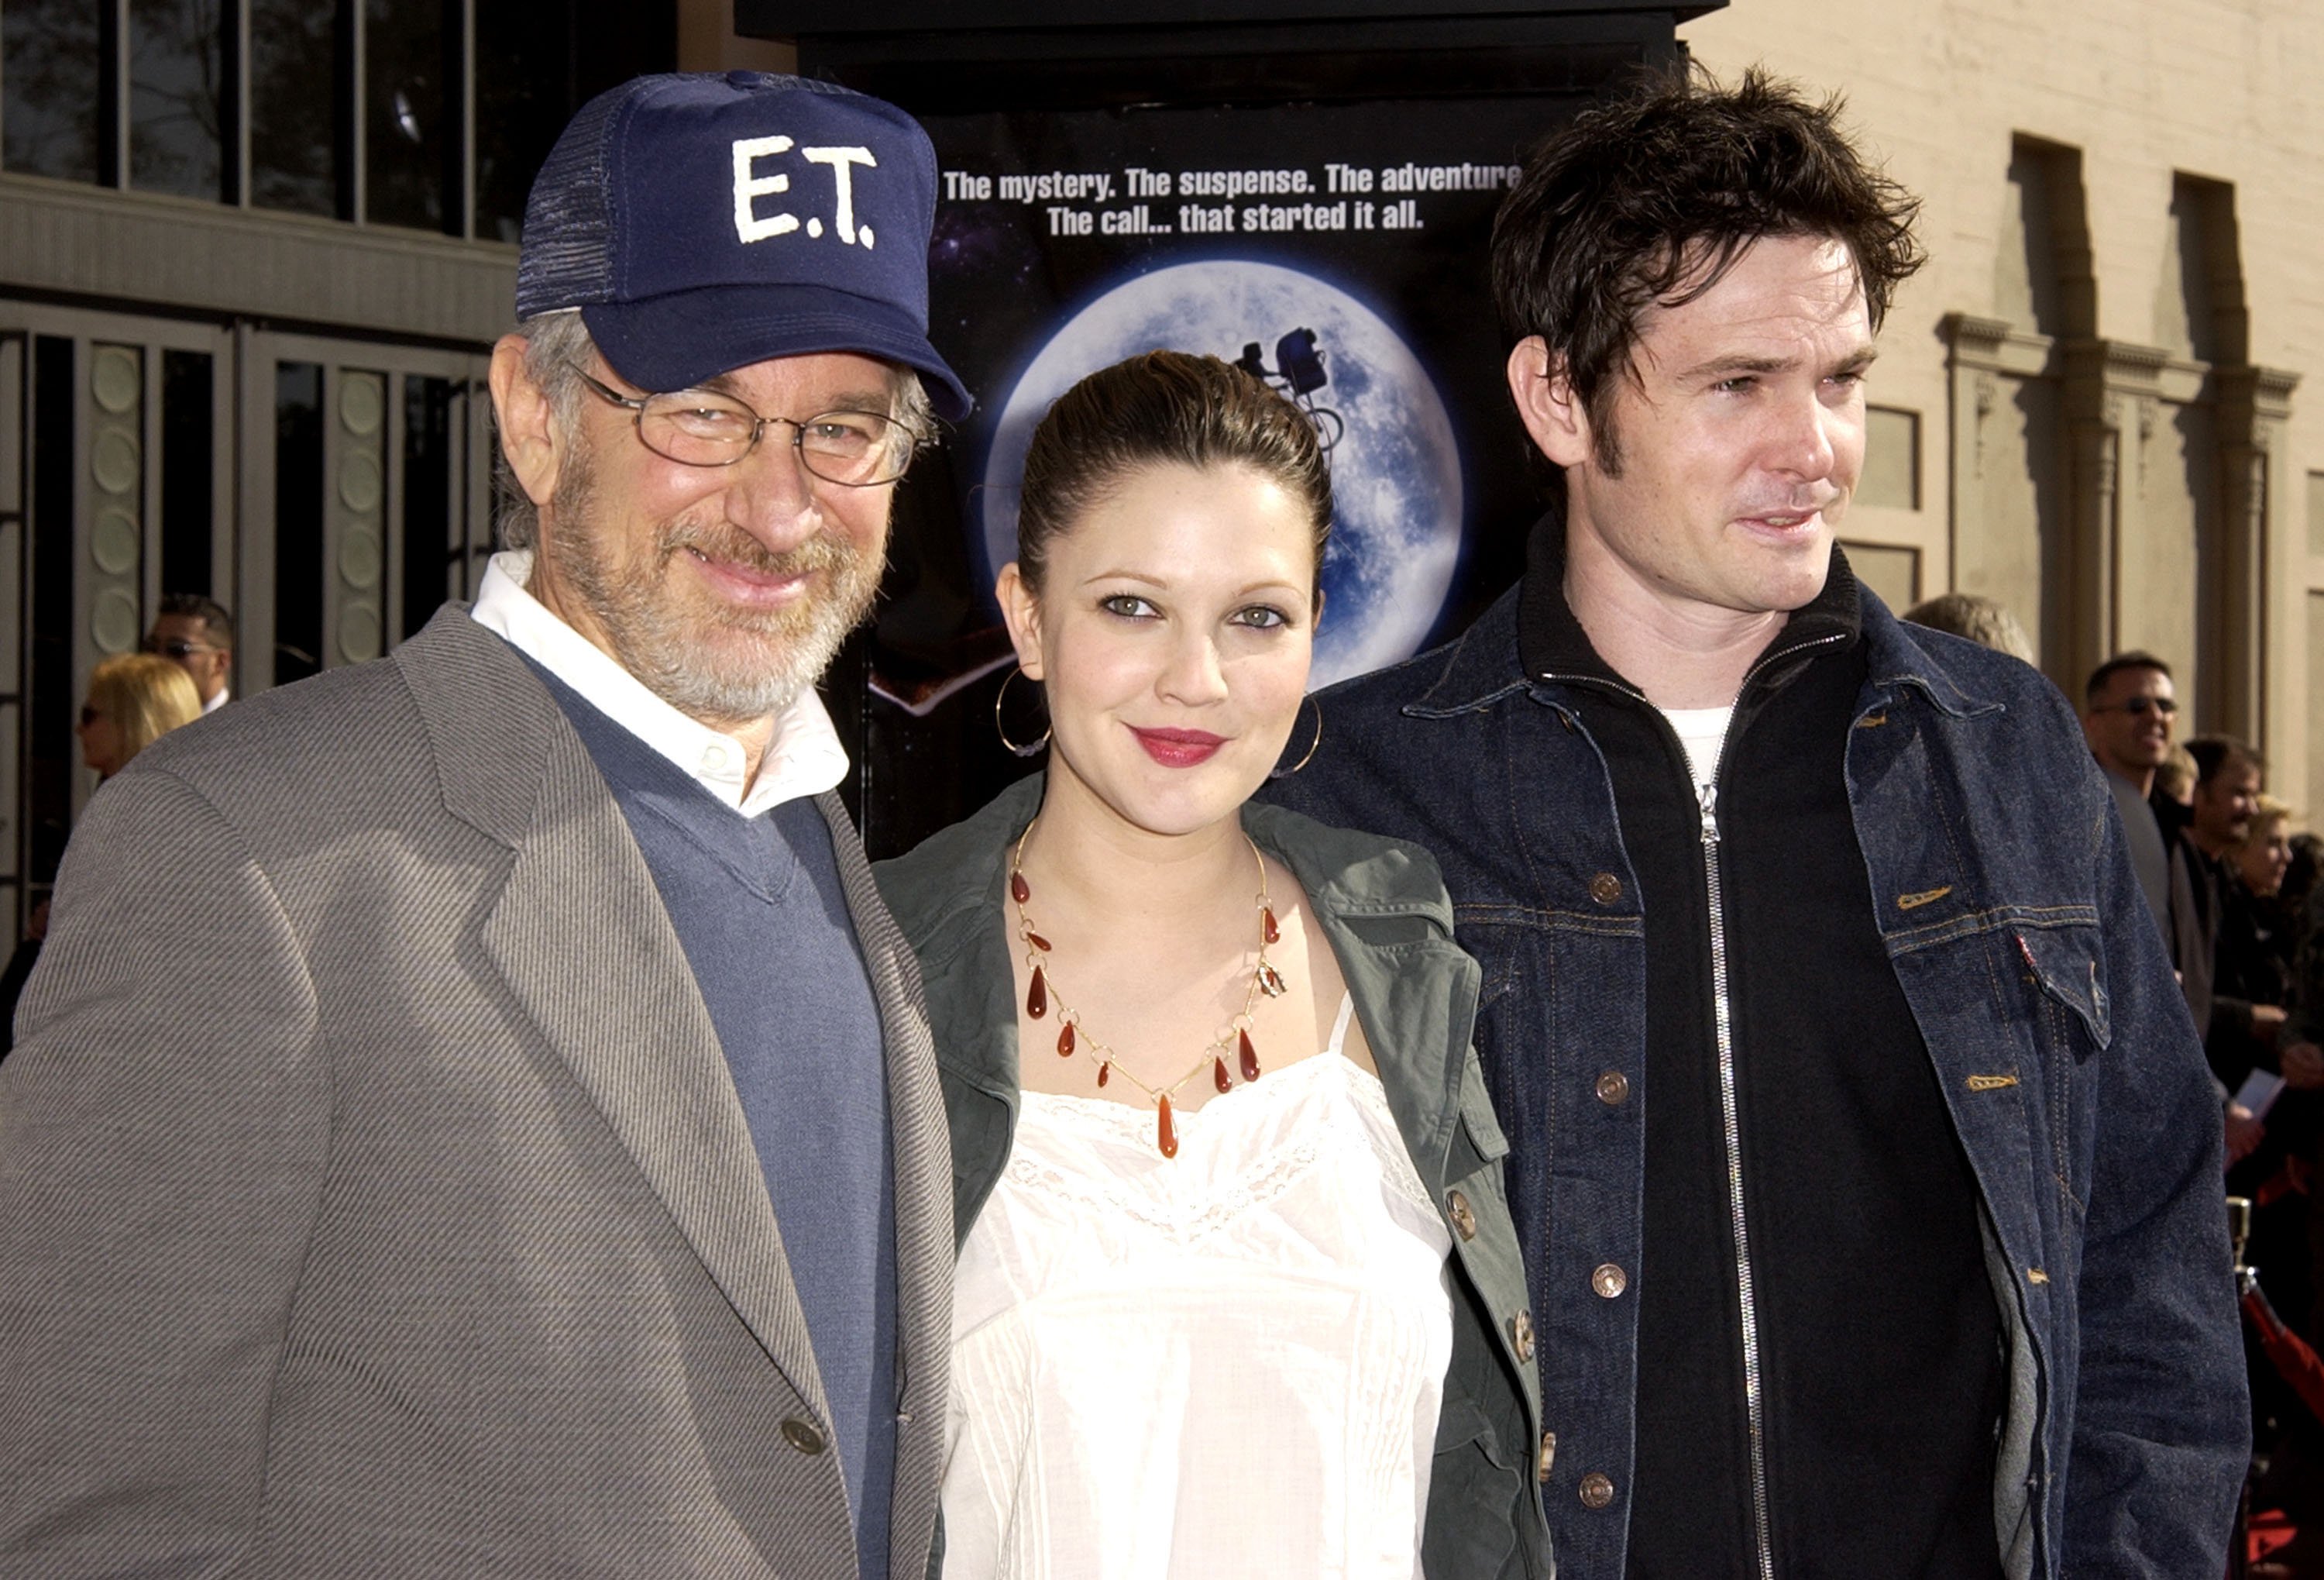 Steven Spielberg, Drew Barrymore & Henry Thomas at the Anniversary Premiere of "E.T.: The Extra-Terrestrial" in California. | Source: Getty Images